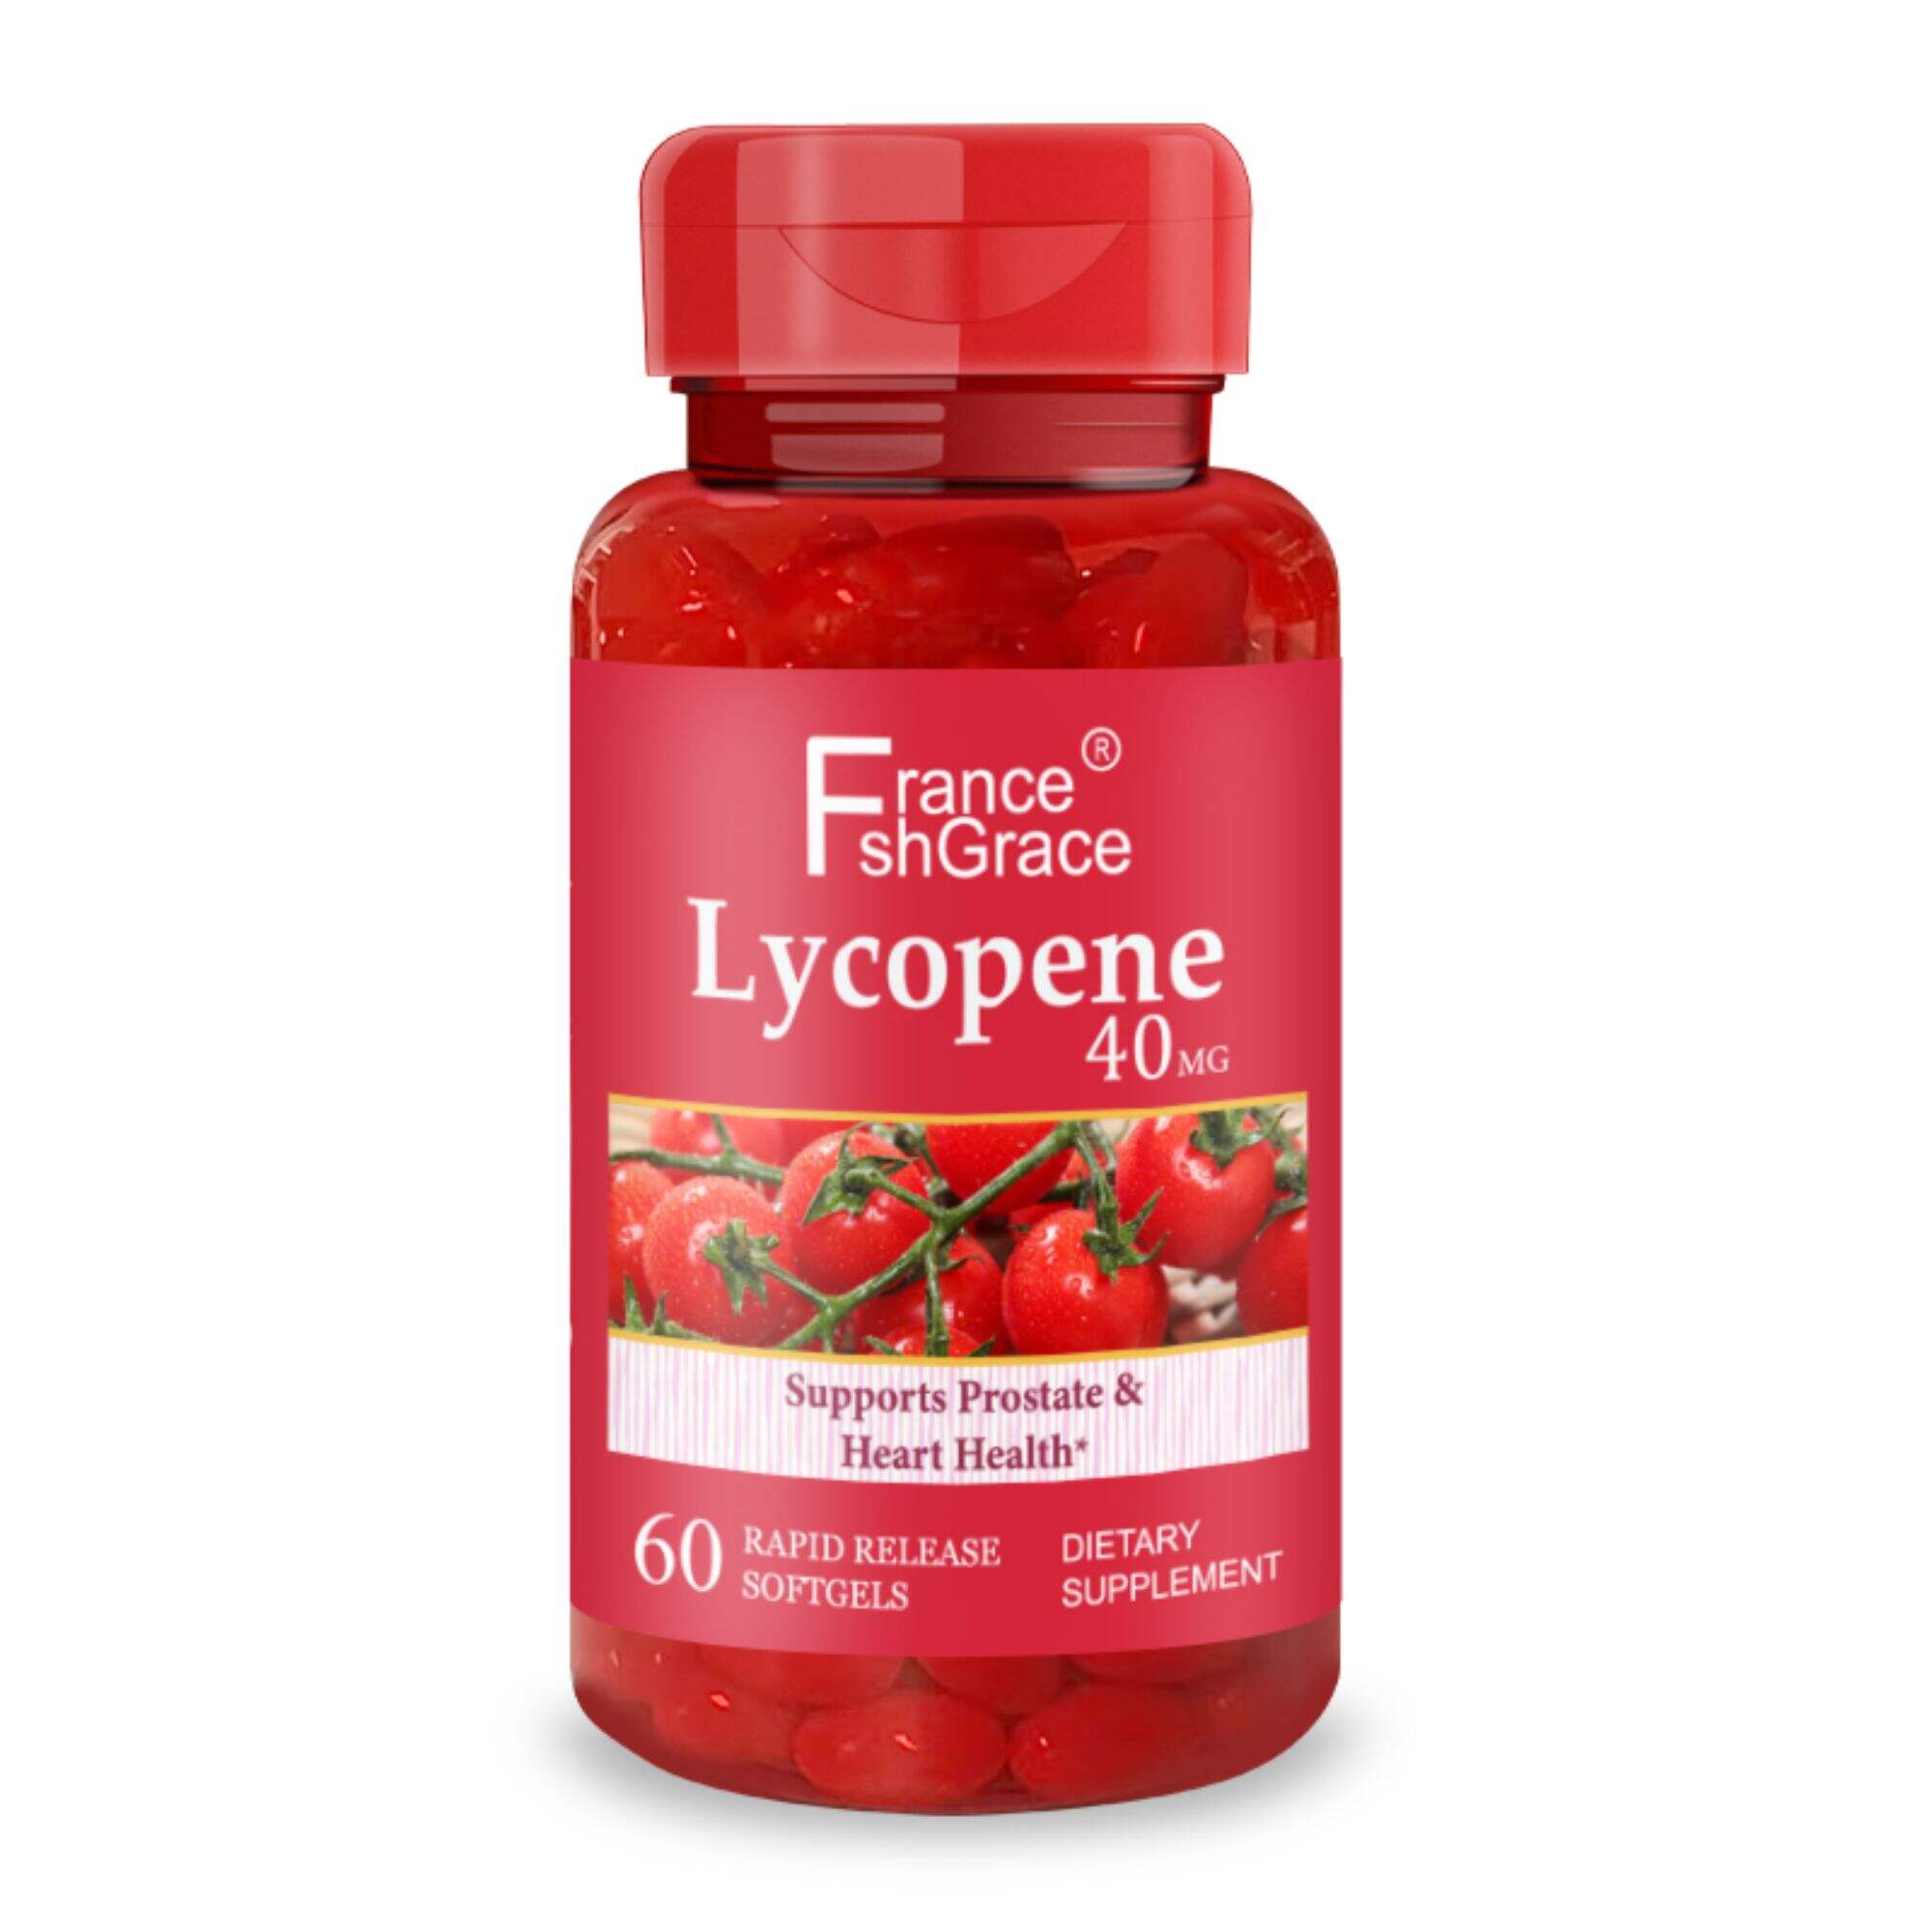 Lycopene Supplement for Prostate and Heart Health Support